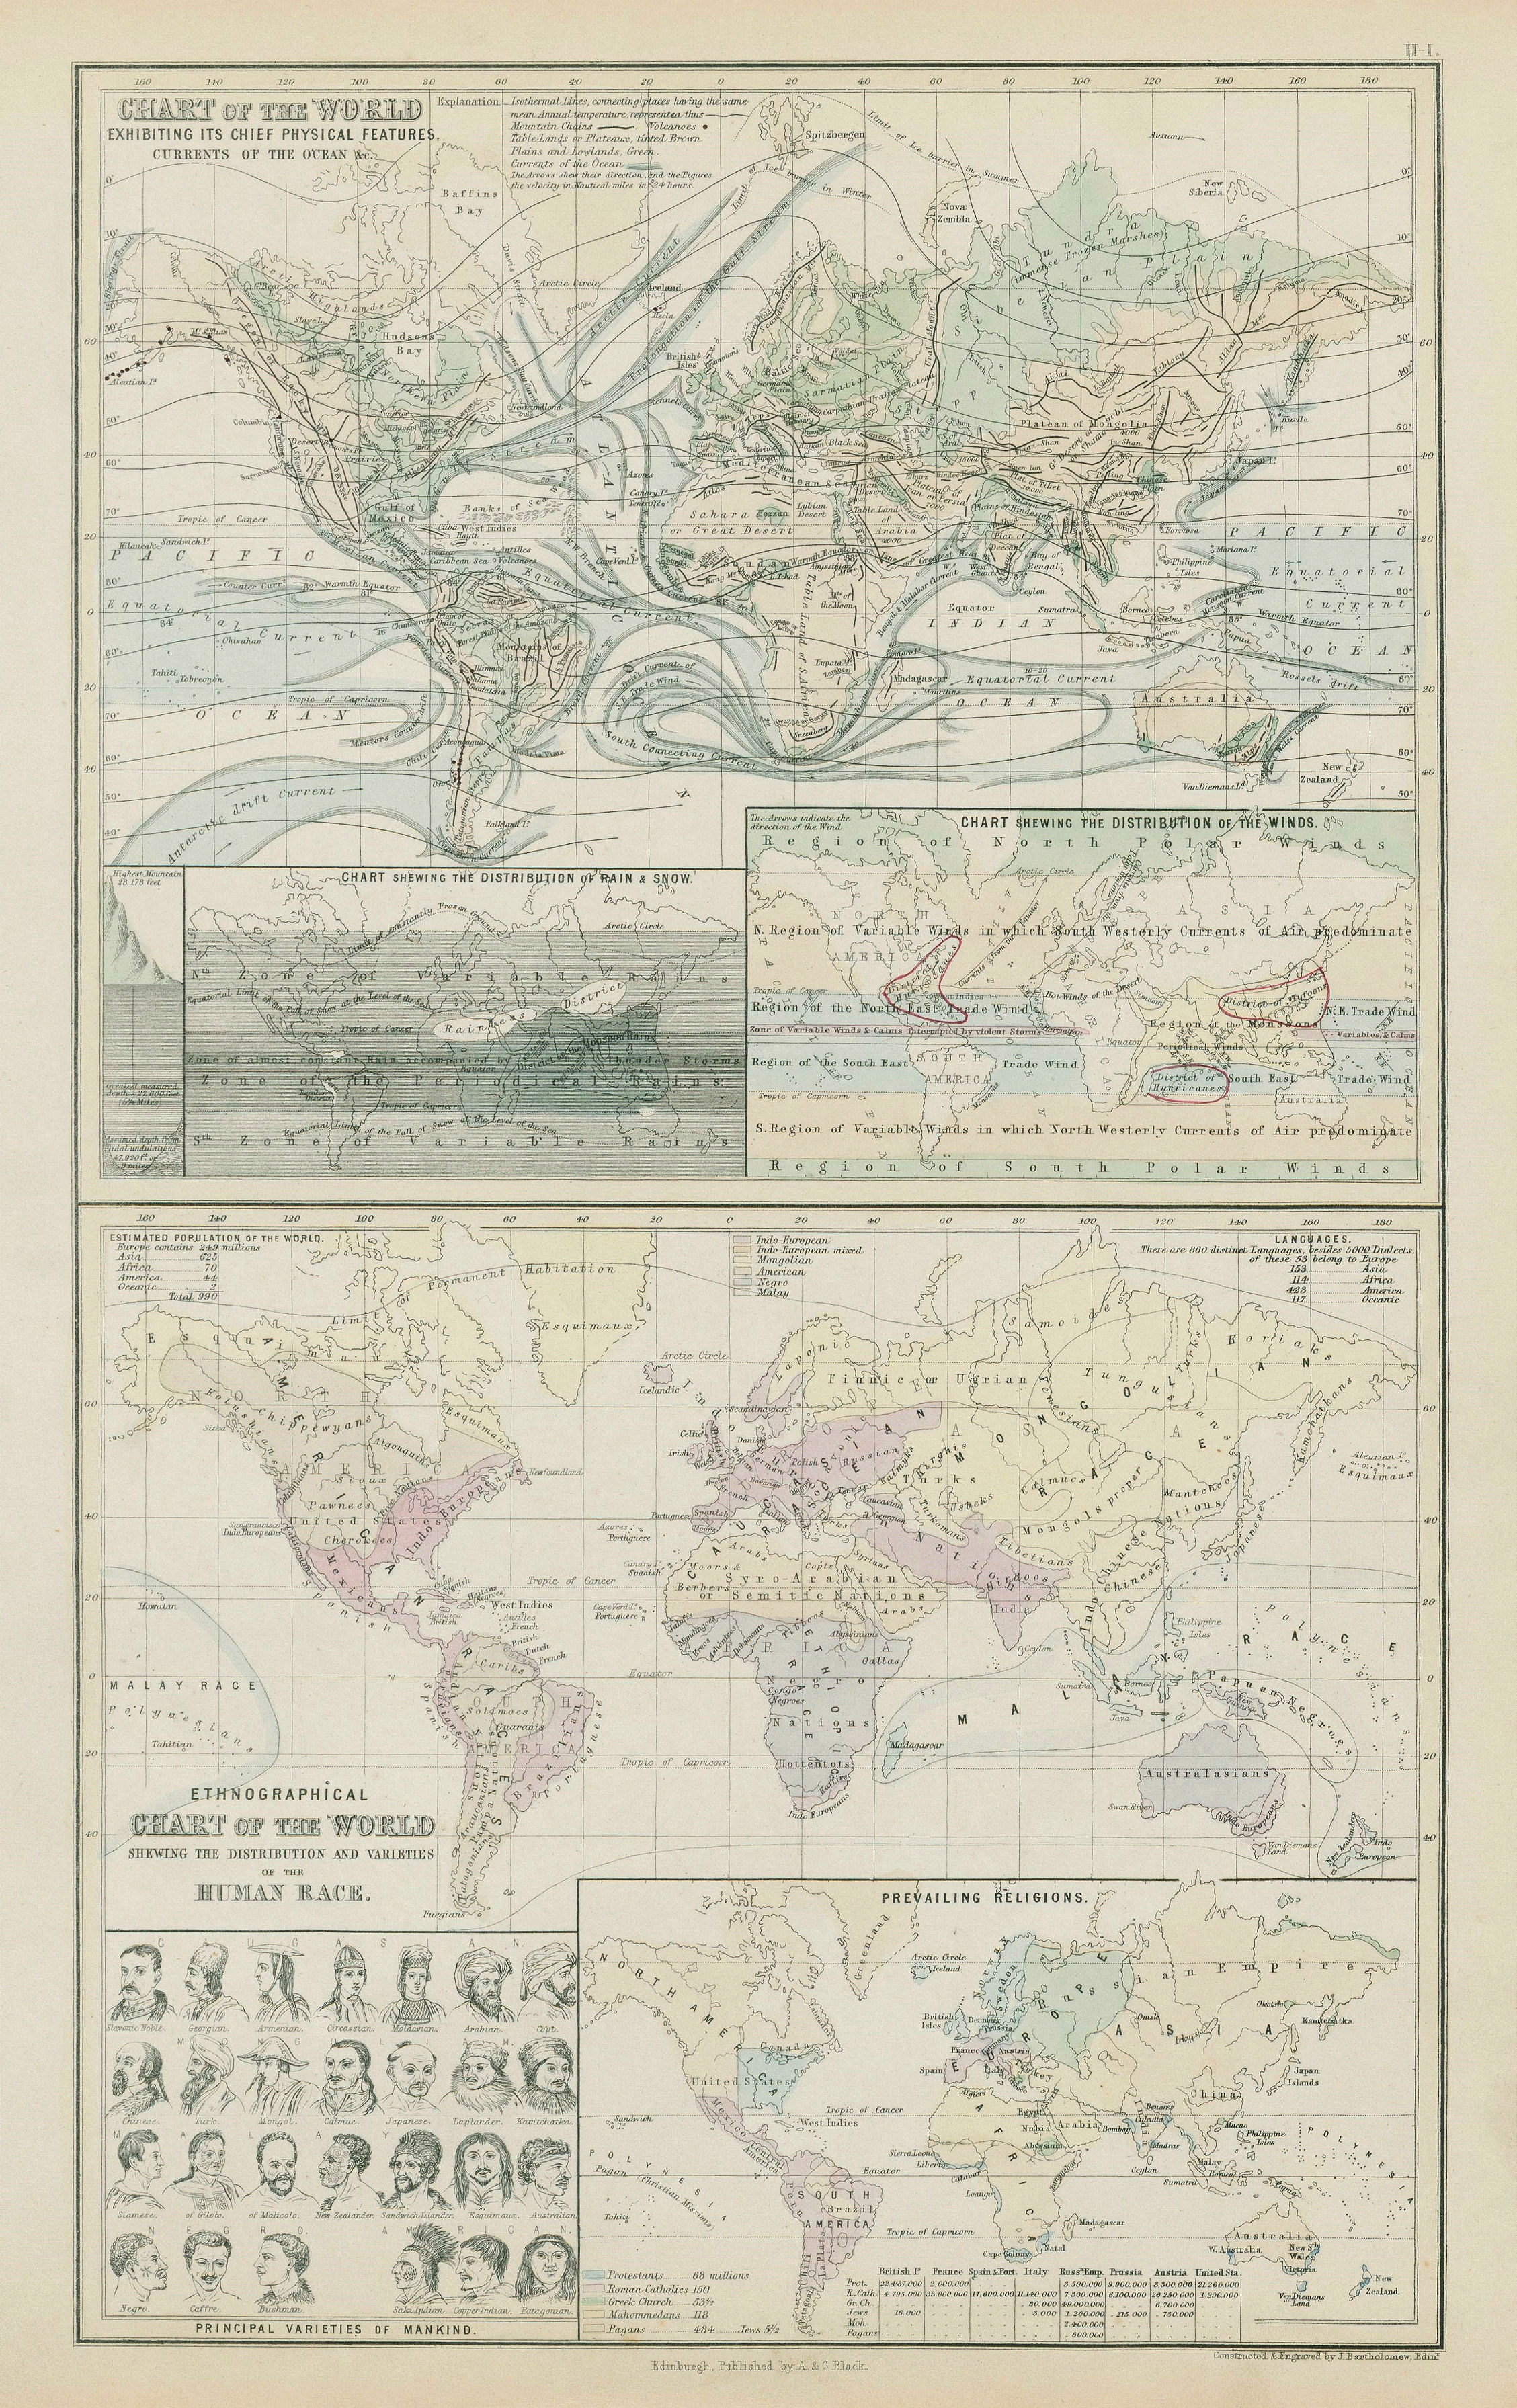 Associate Product World physical features ocean currents ethnographical religions 1856 old map